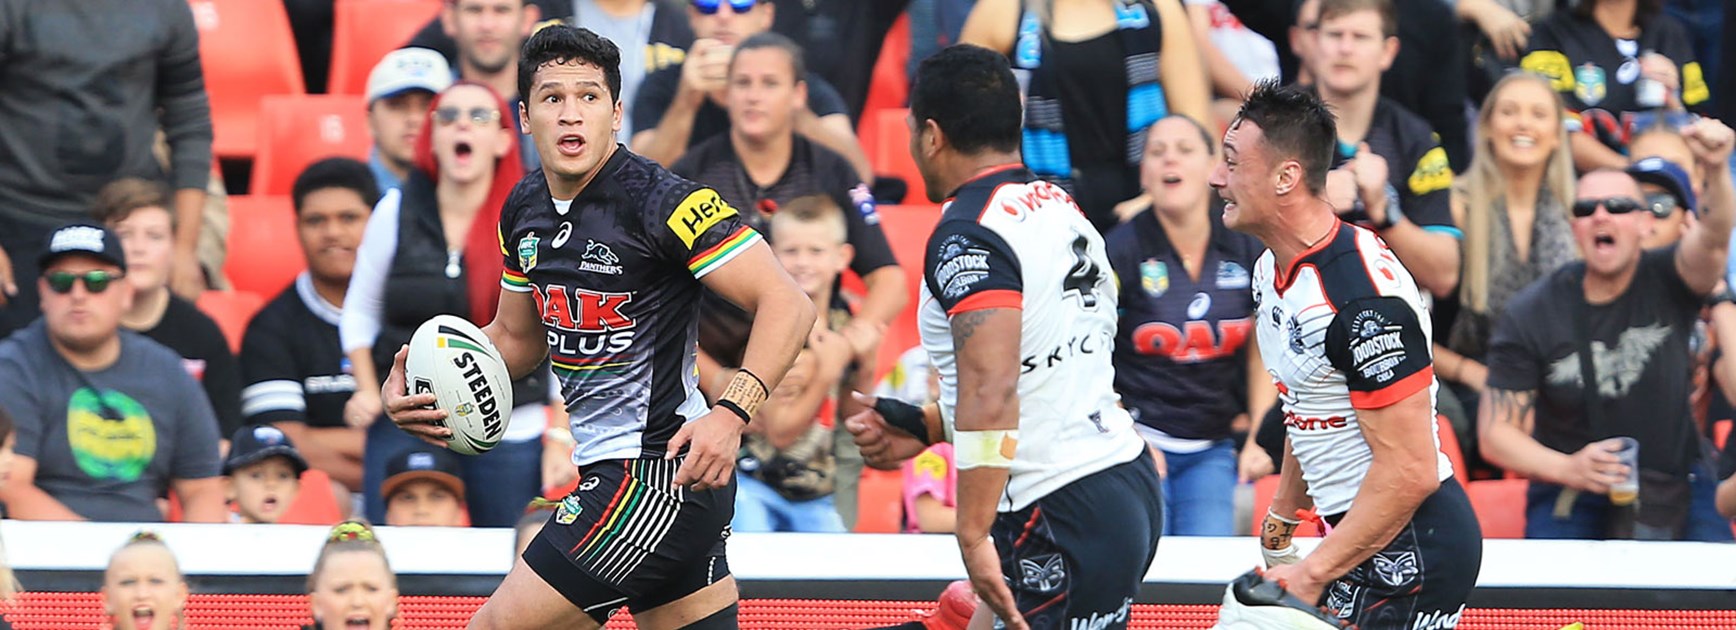 Panthers v Warriors: Five key points